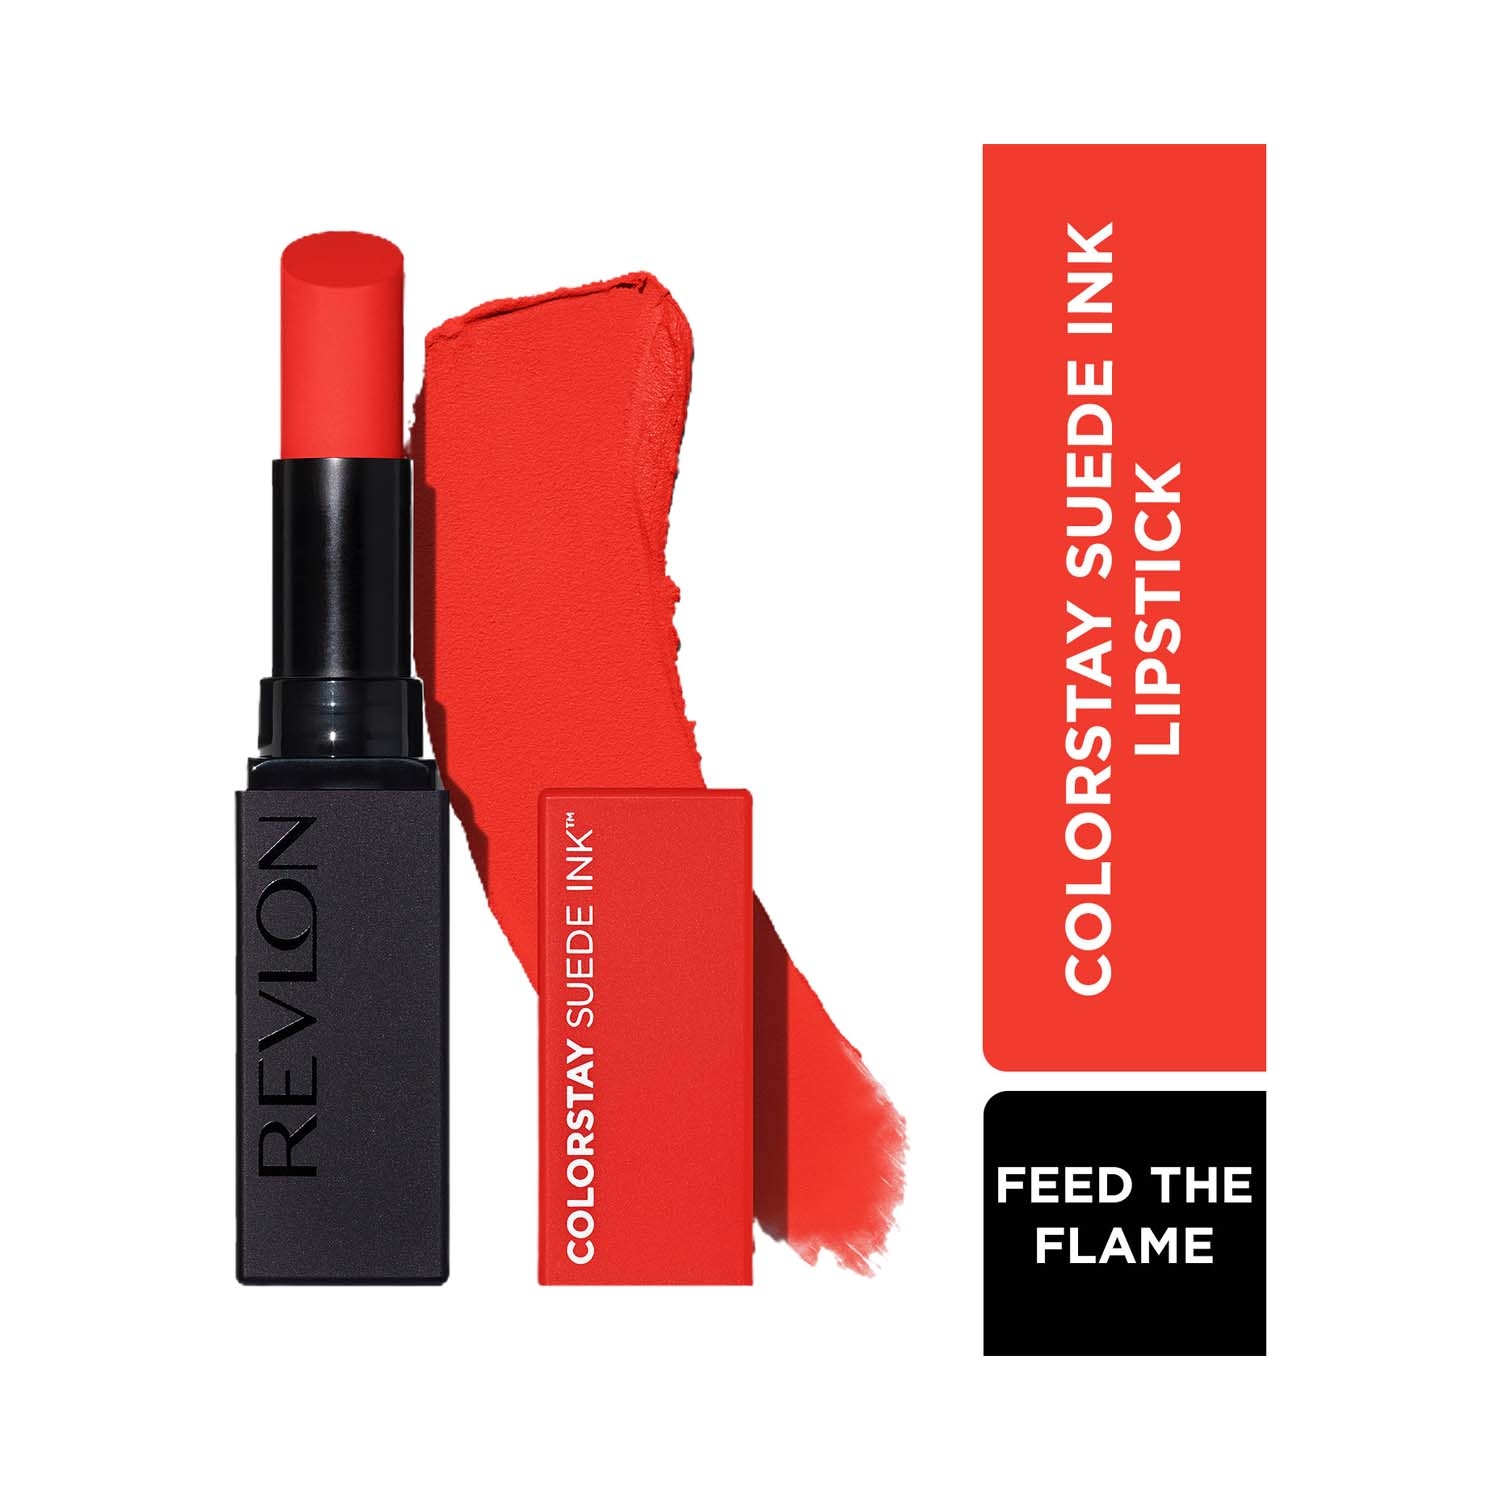 Revlon Colorstay Suede Ink Lipstick - 007 Feed The Flame (2.5g)